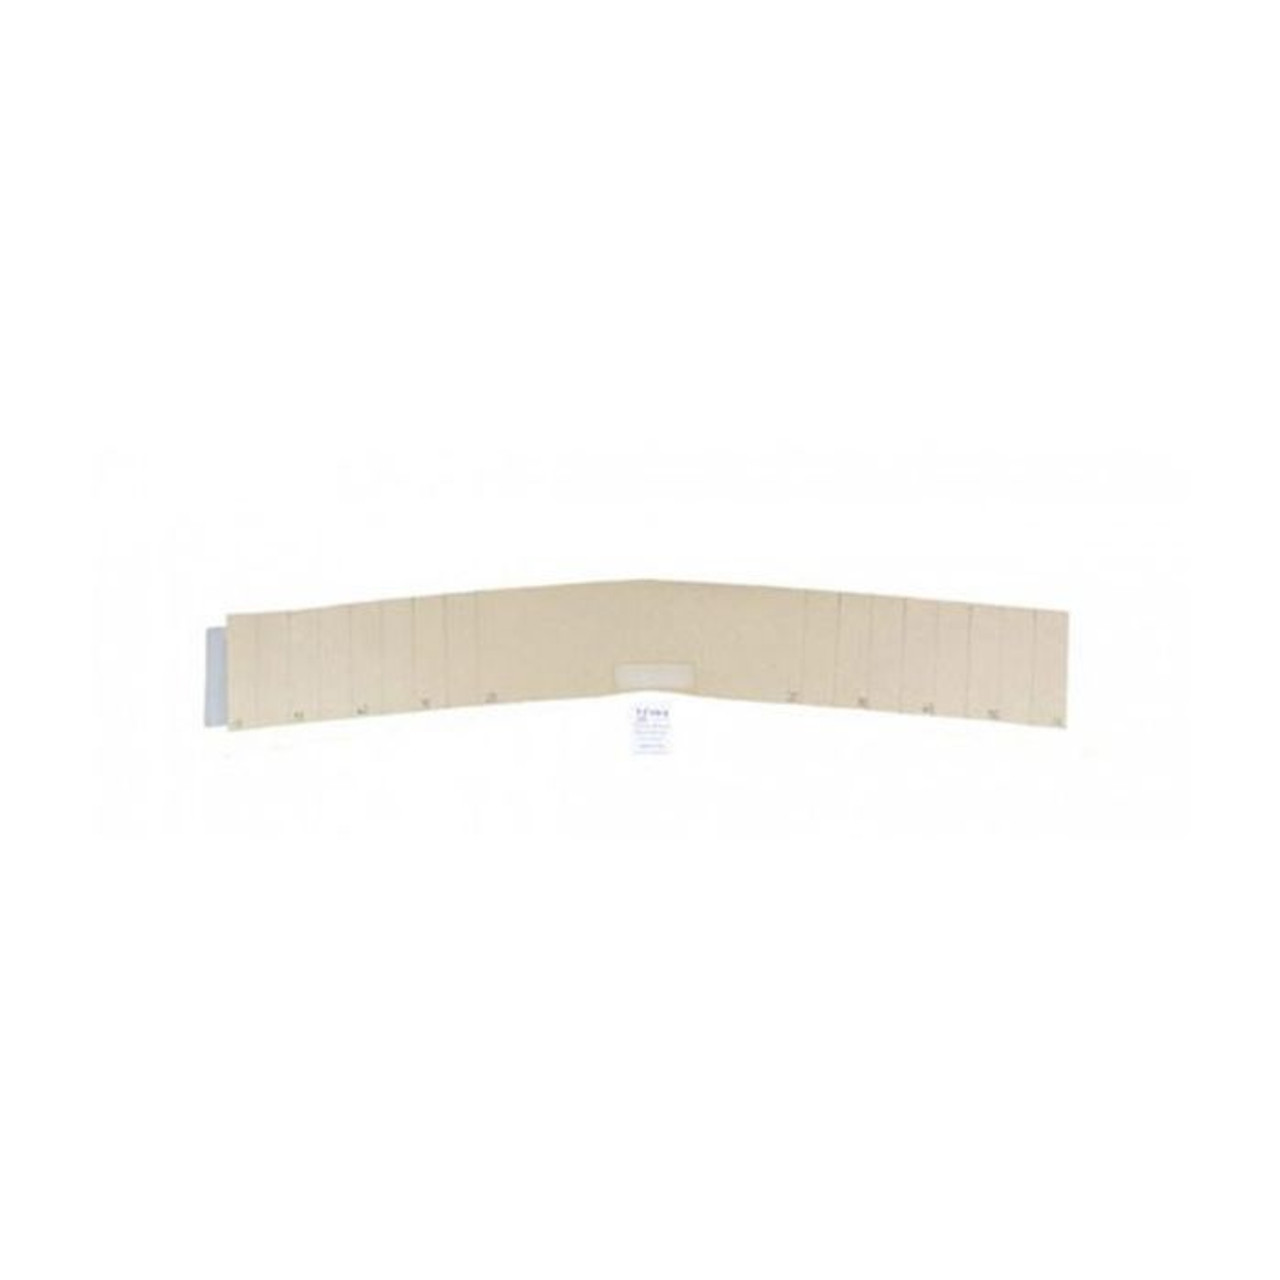 BSN-7611804 BX/1 JOBST FARROWWRAP STRONG TRIM-TO-FIT LEGPIECE EXTRA BAND, 30-40 MMHG, EXTRA LARGE, TAN